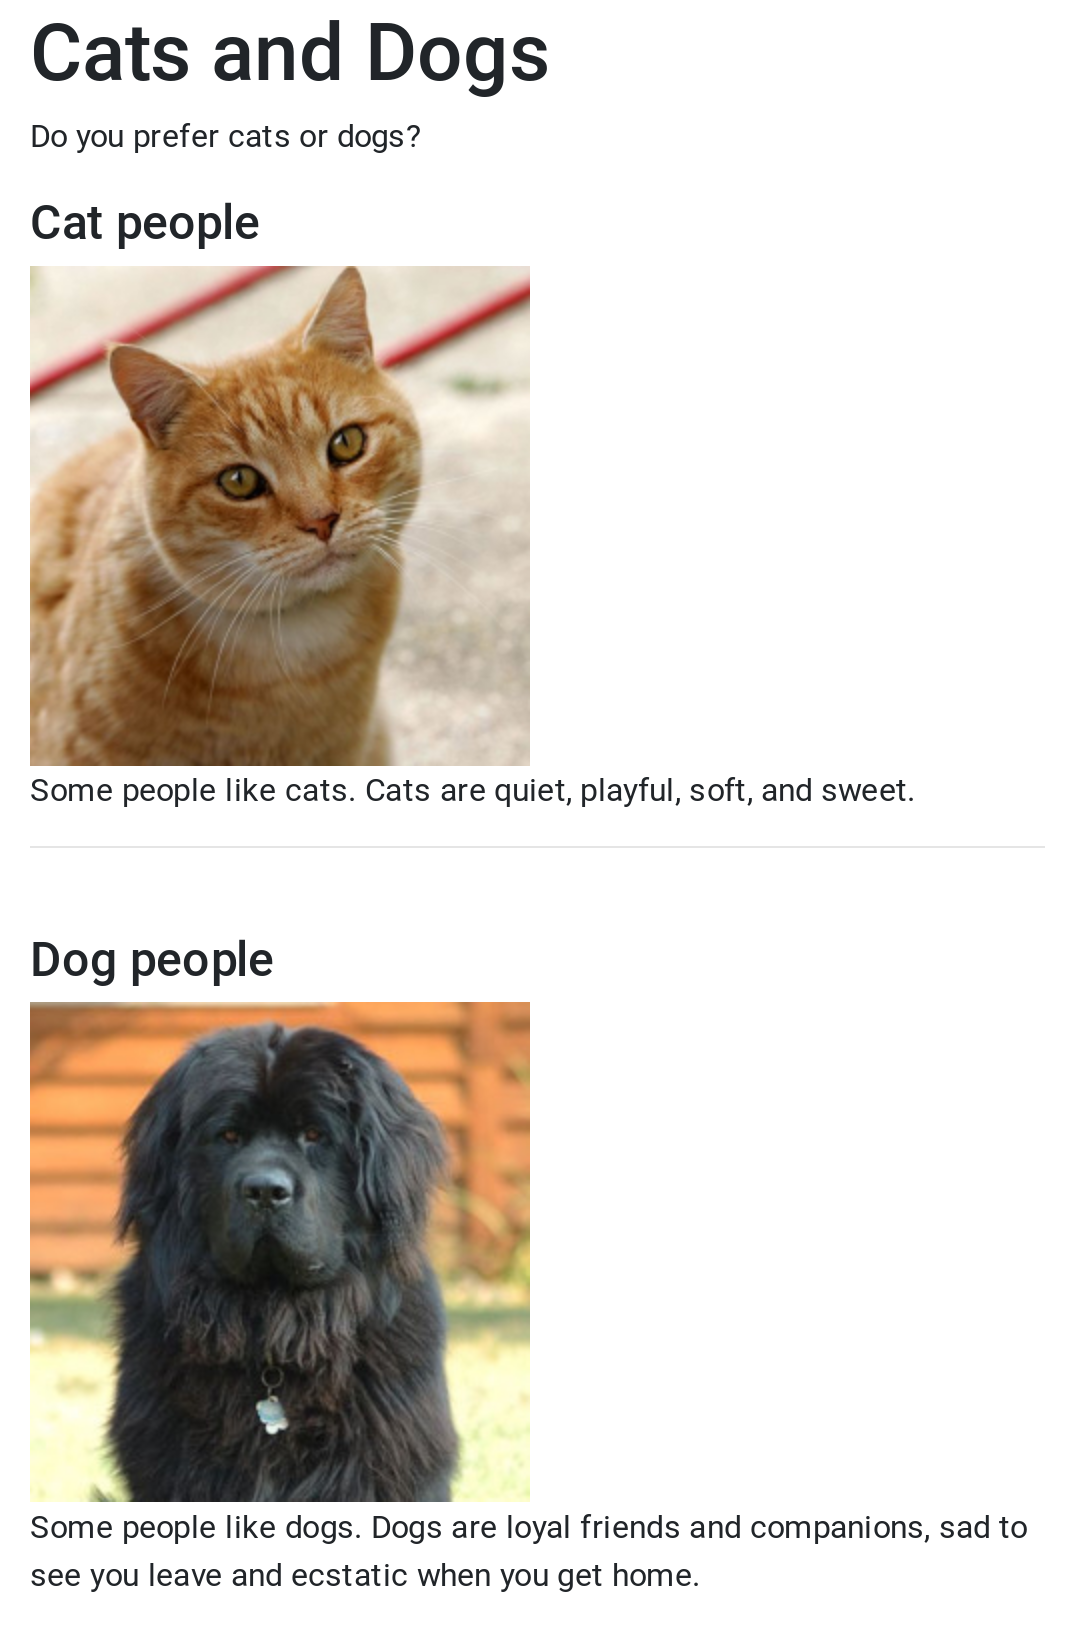 Screenshot of a web page with an image of a cat and a dog with some text.